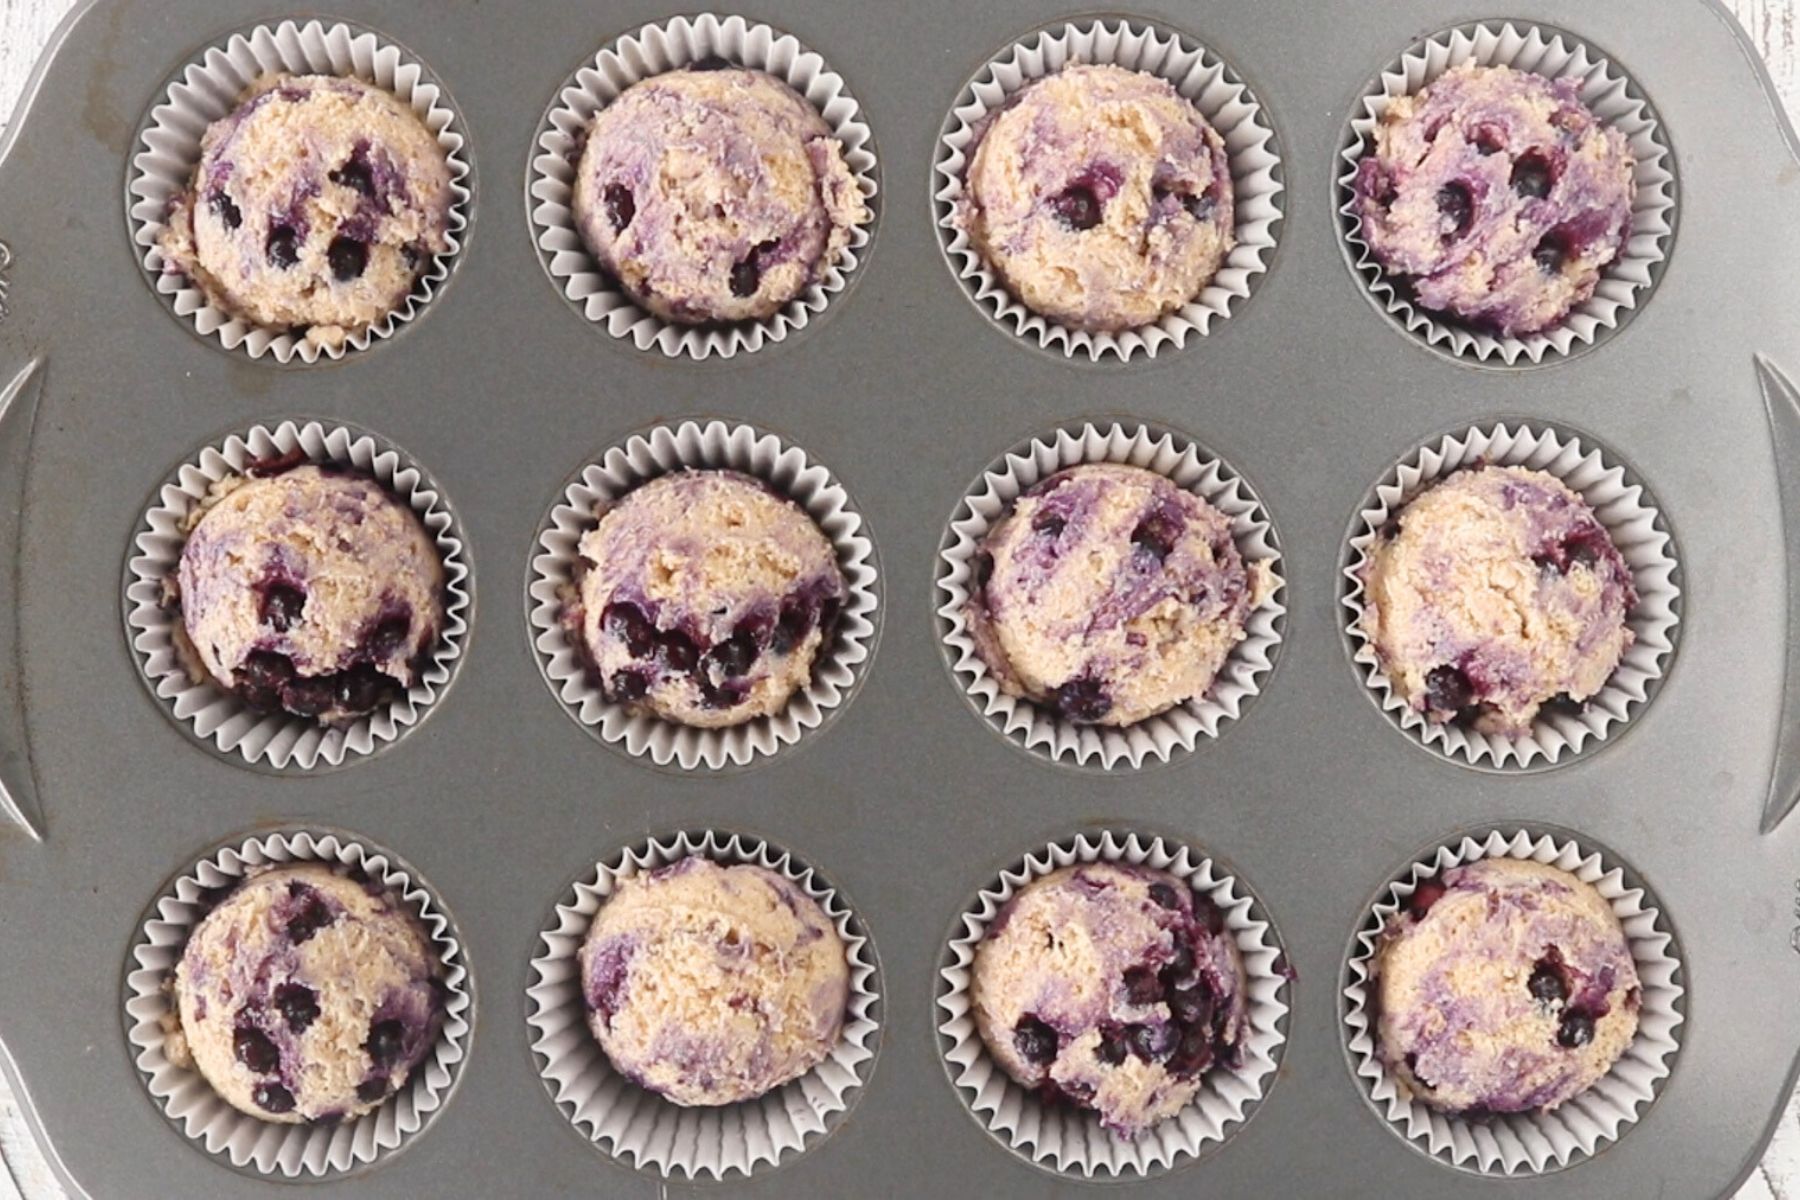 Step 5 - Blueberry Protein Muffins. Scoop batter into muffin tin cups. 